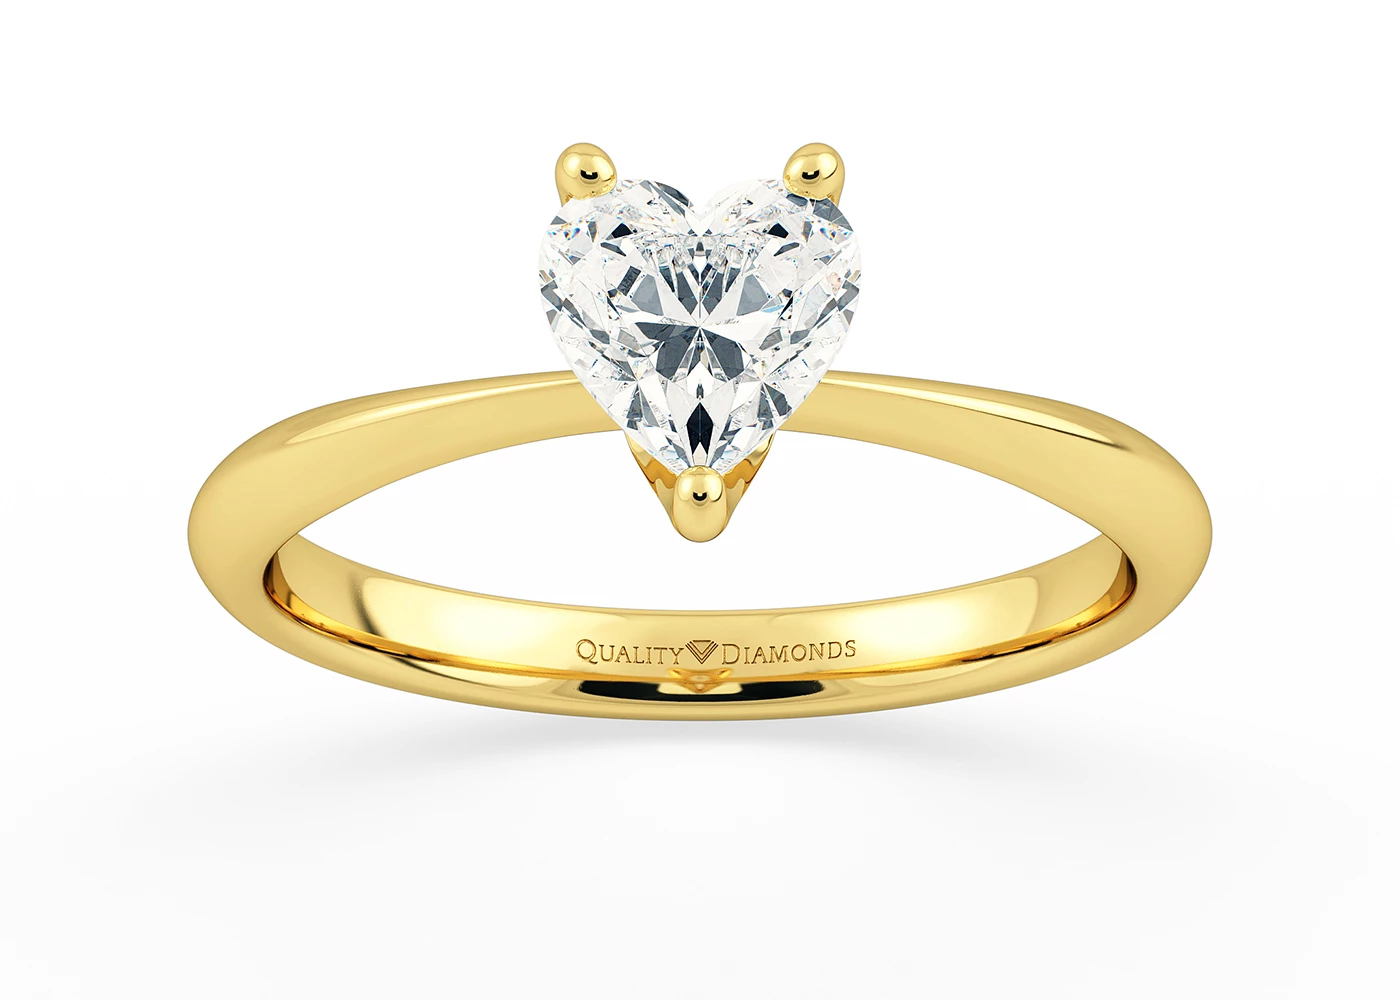 One Carat Heart Solitaire Diamond Engagement Ring in 18K Yellow Gold